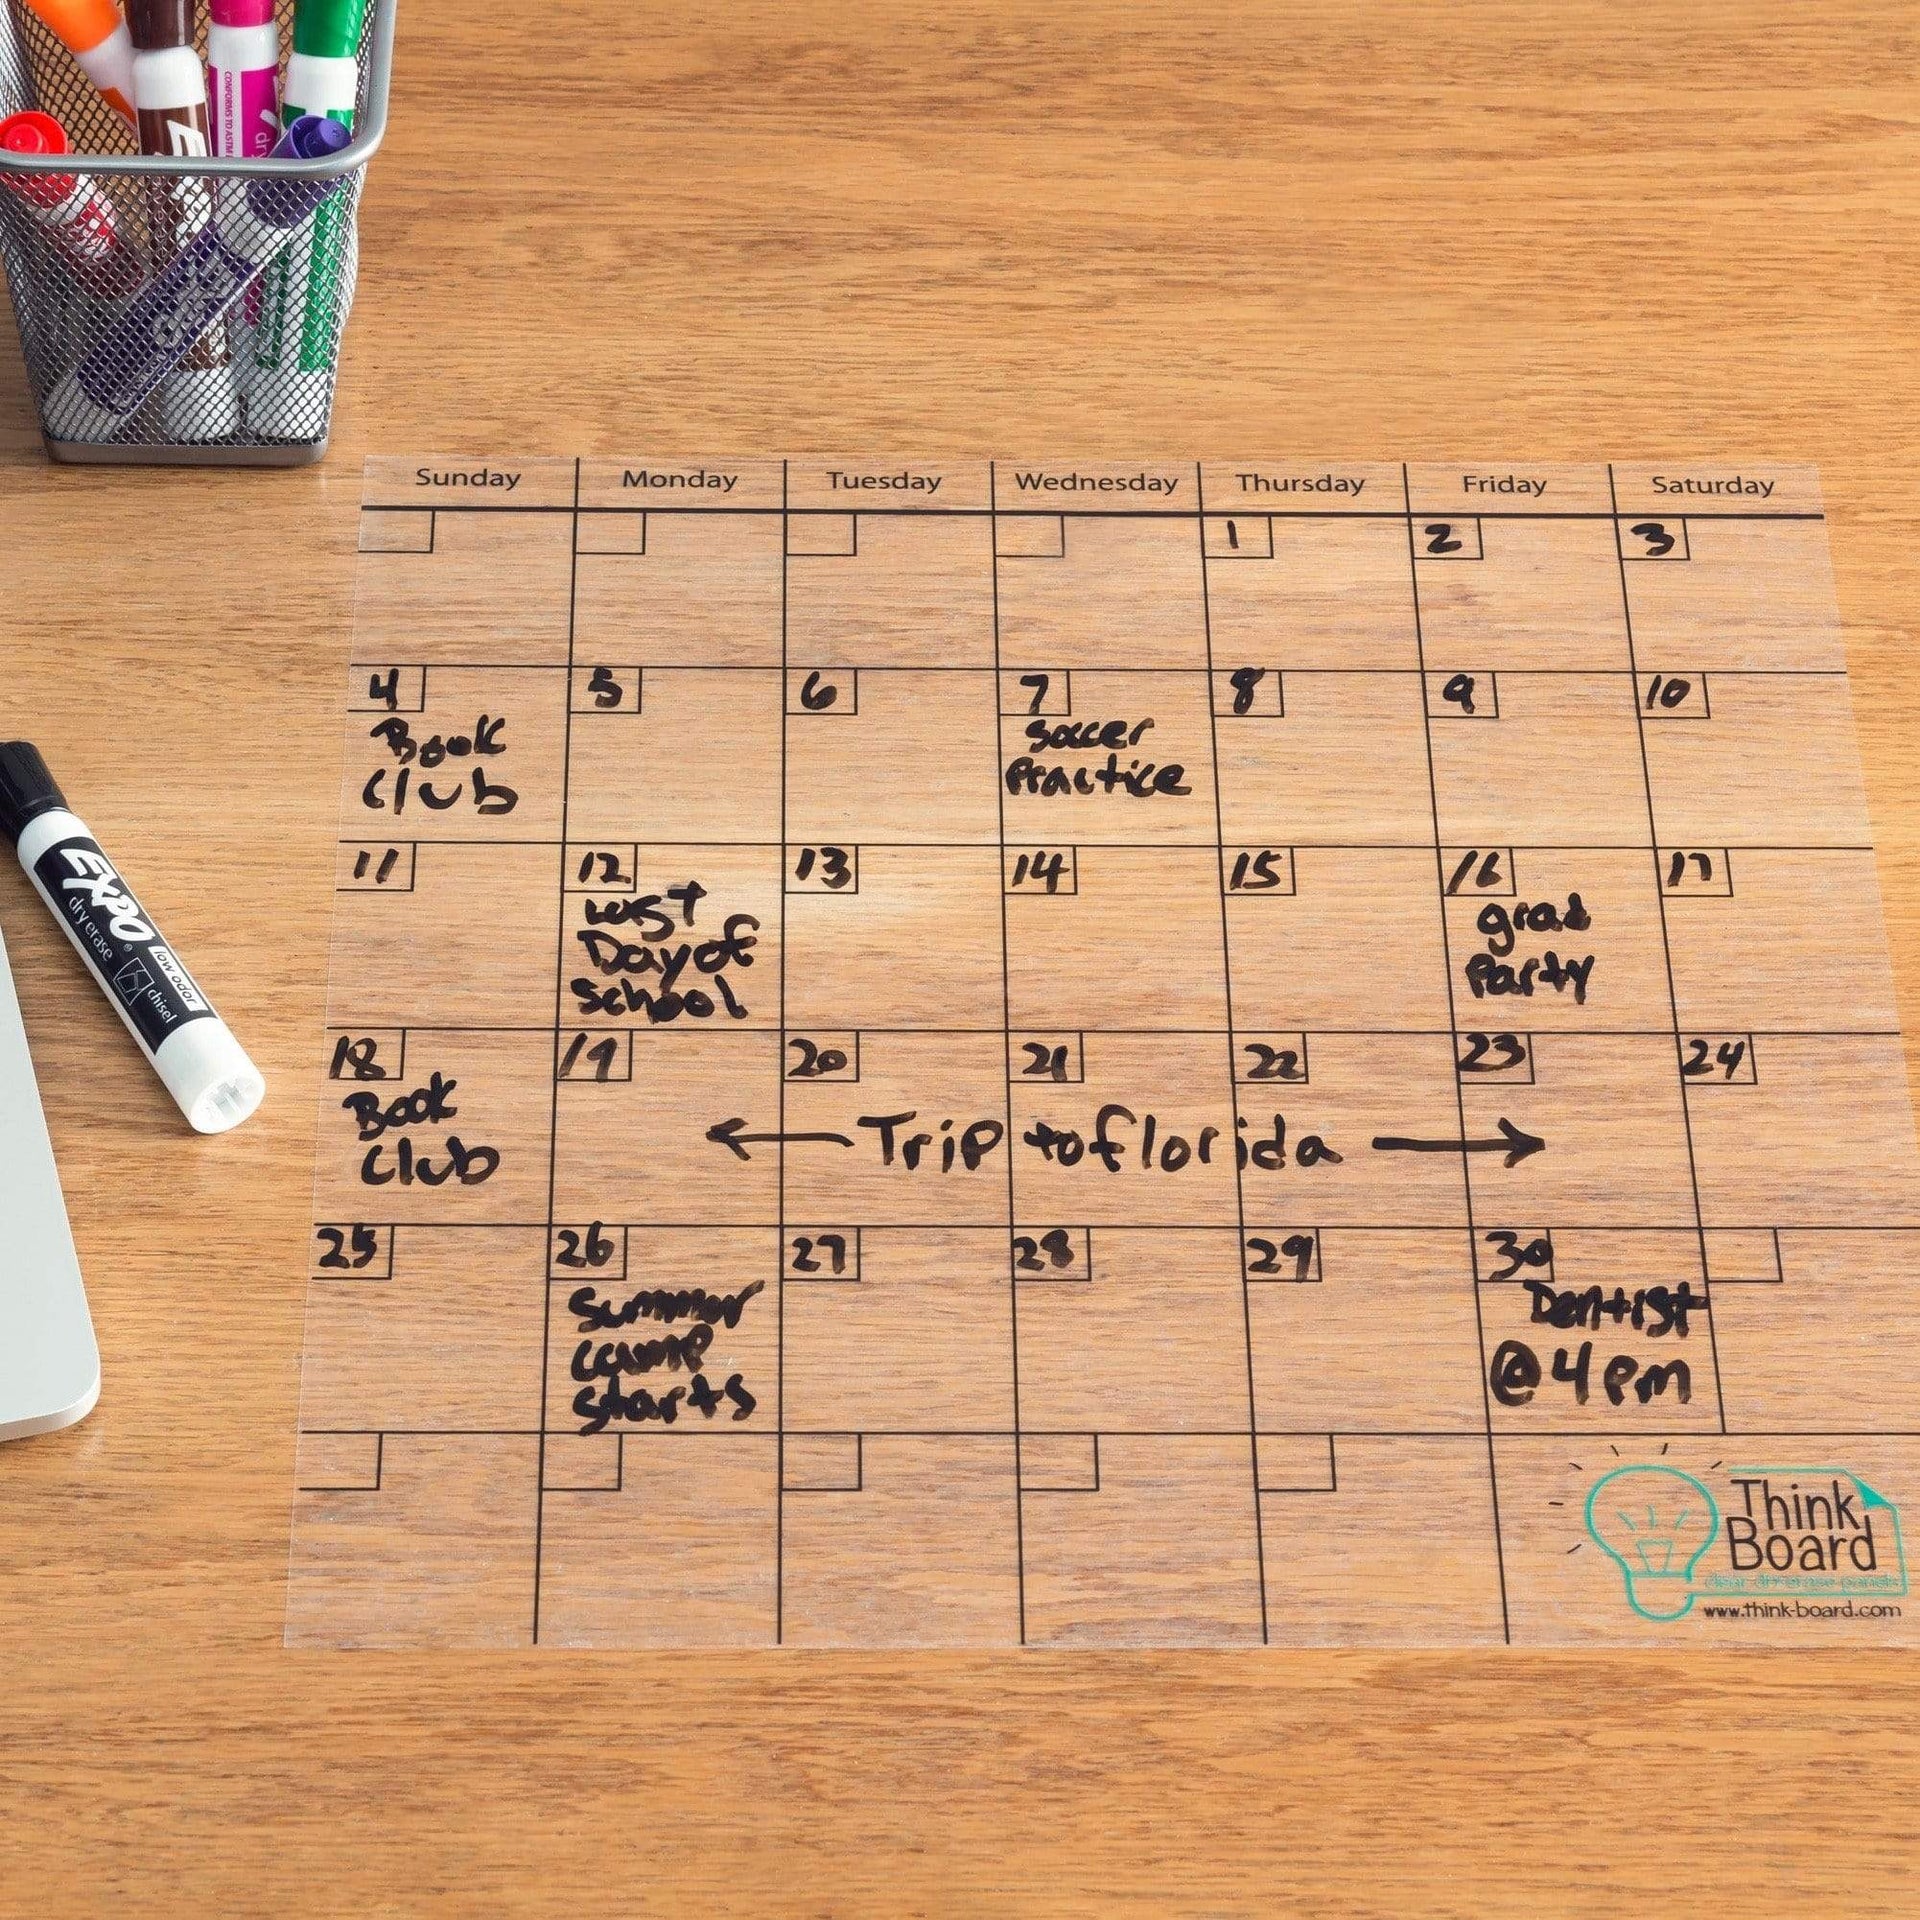 Think Board Self-Adhesive Whiteboard Wall and Refrigerator Calendar, Peel and